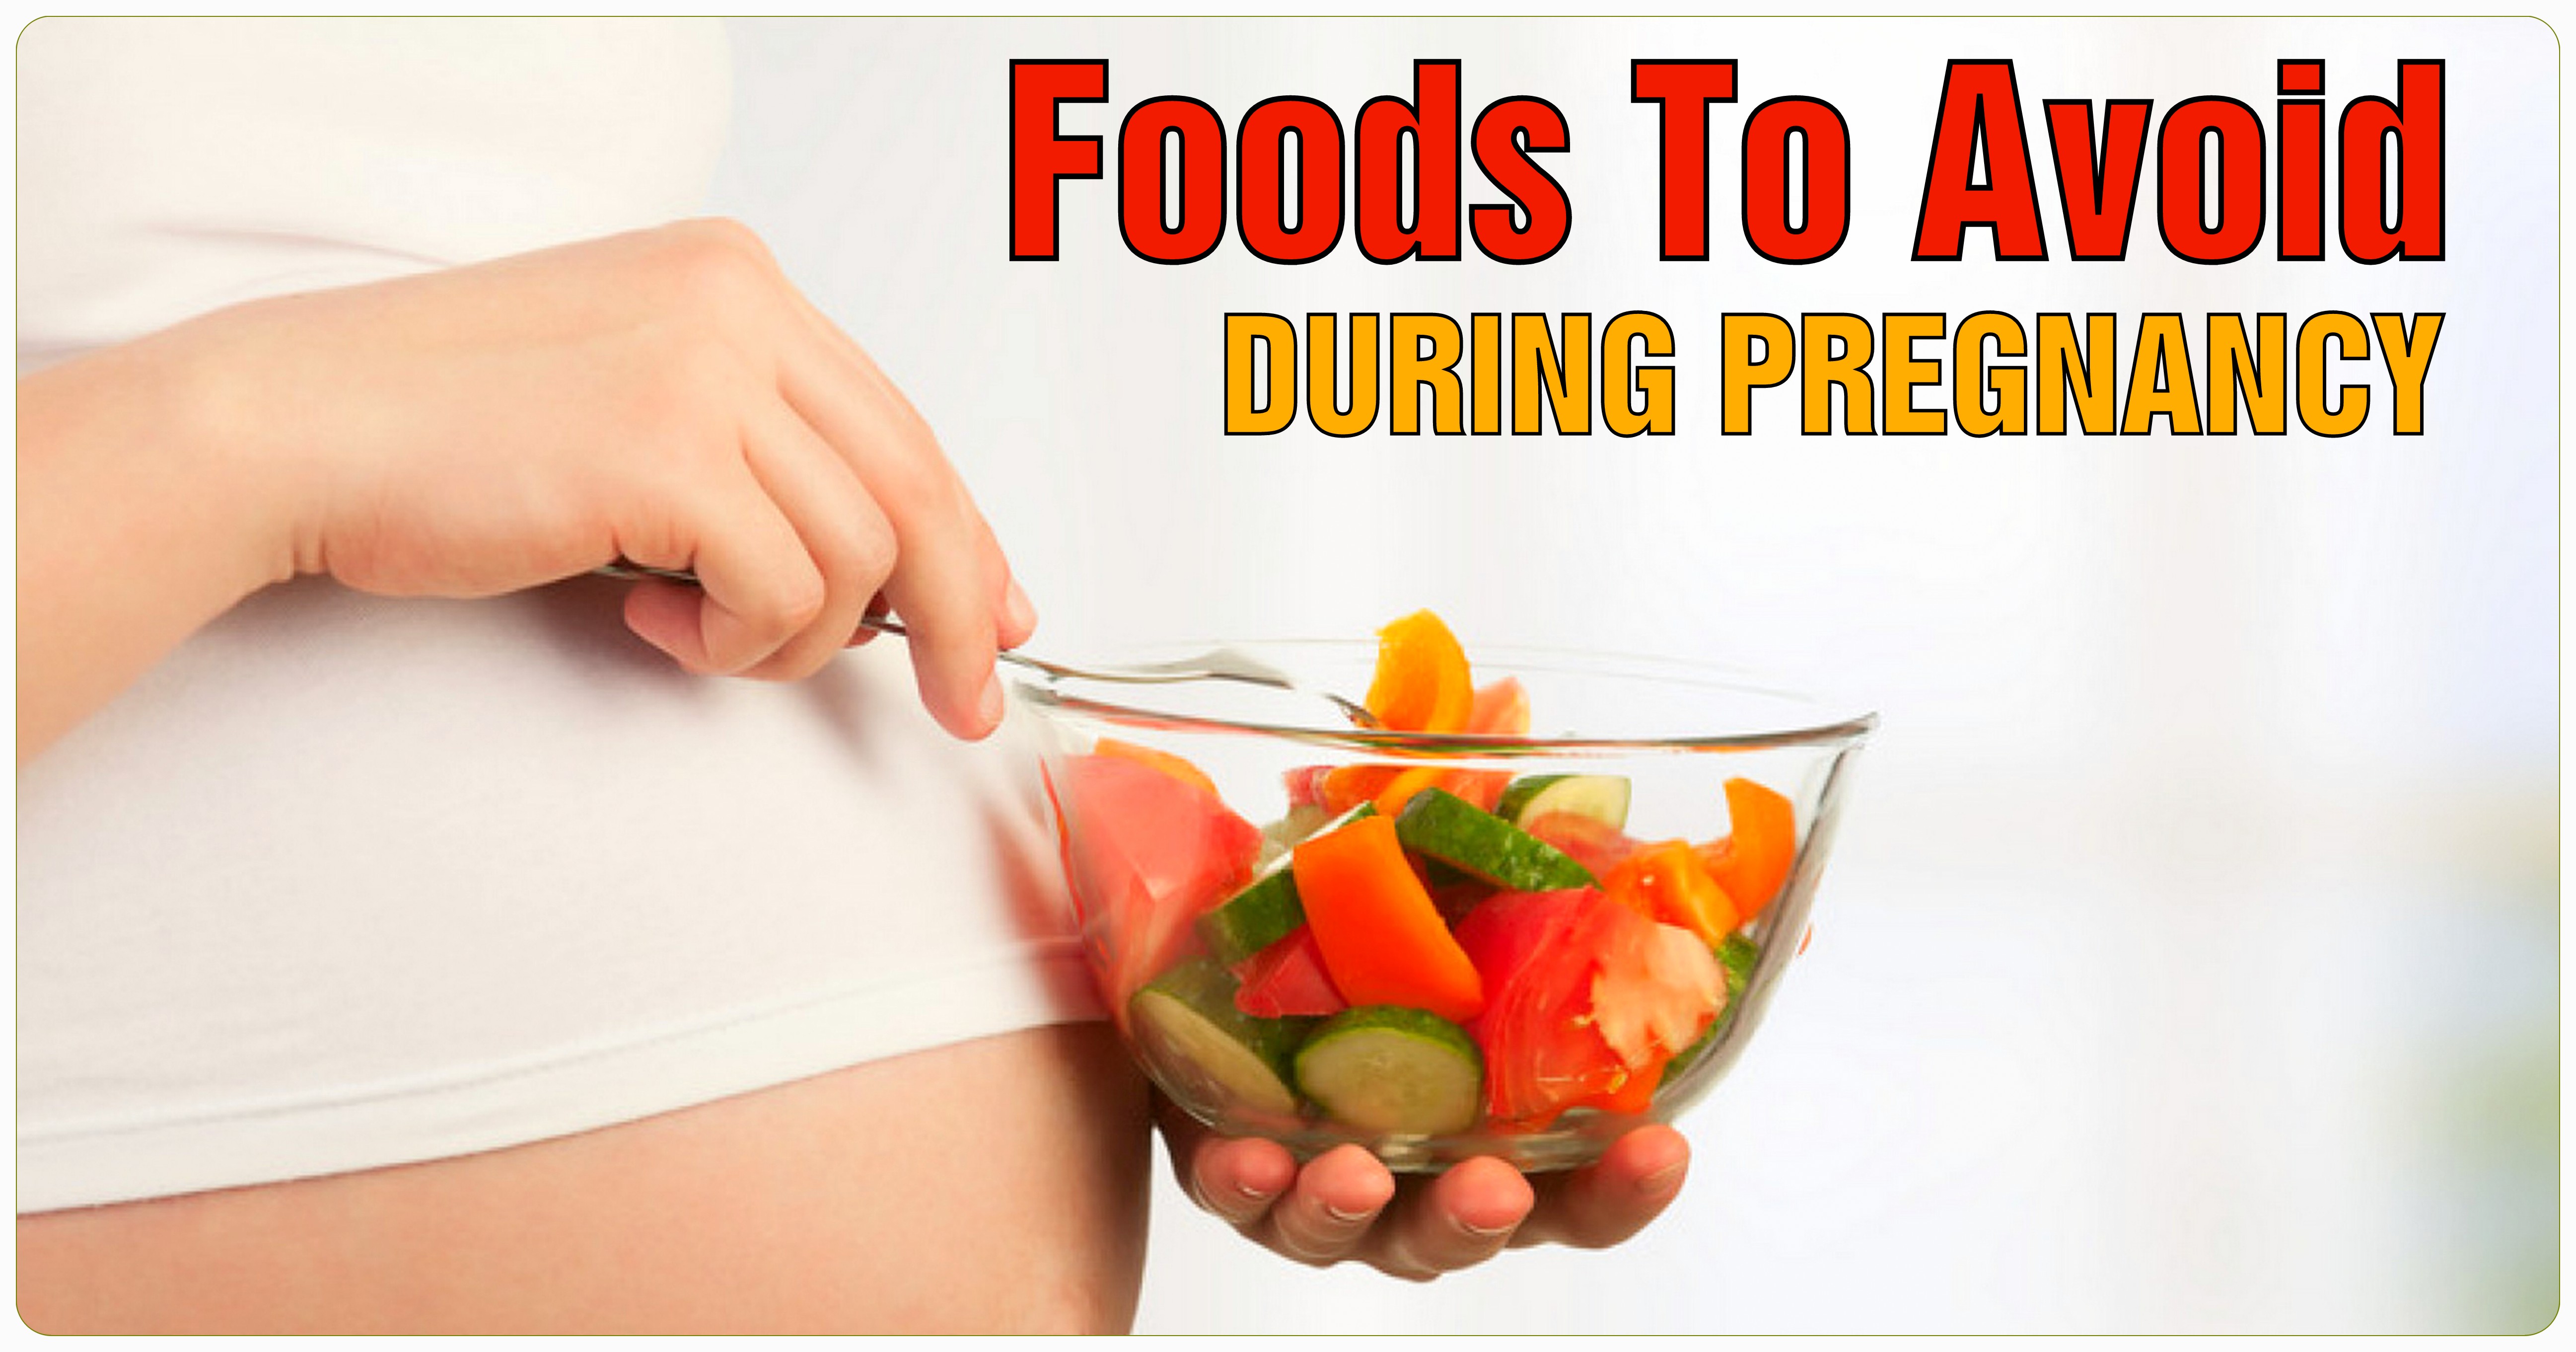 What Not To Eat During Pregnancy Fruits To Avoid During Pregnancy India Food Chart During